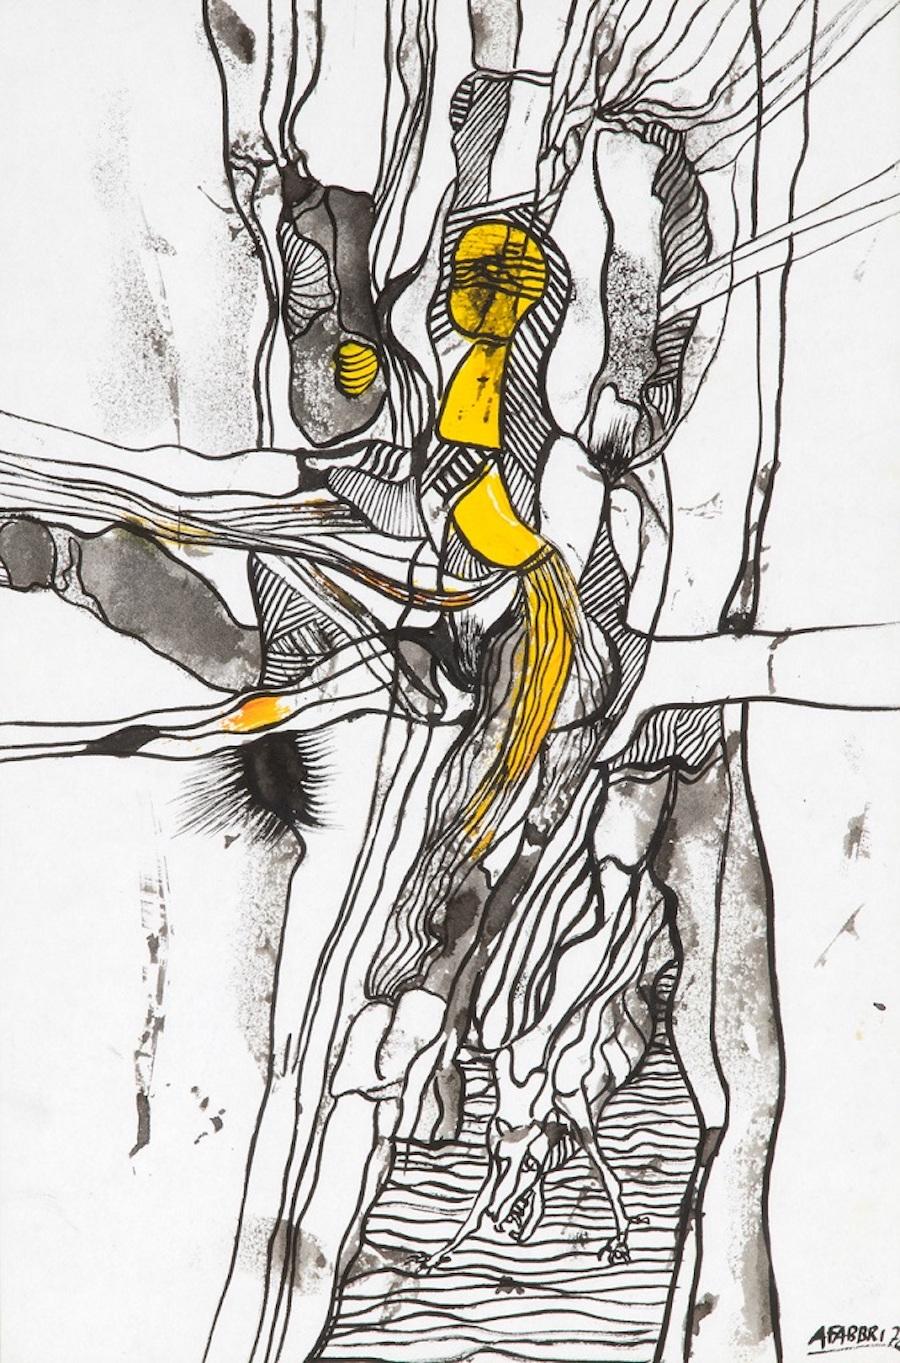 Agenore Fabbri Abstract Drawing - Composition 2 - Ink and Watercolor Drawing by A. Fabbri - 1952